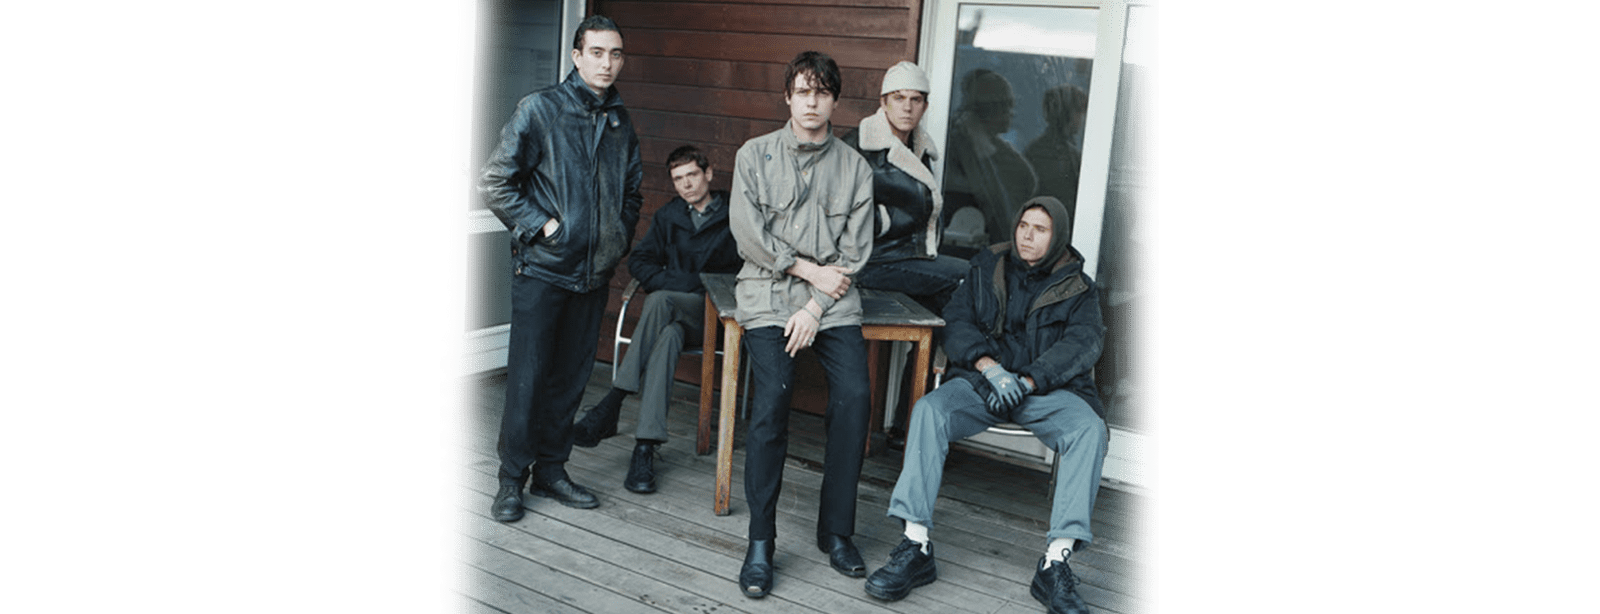 The band Iceage have their photo taken on the porch of a house. They stand or sit around a table dressed in muted colours, most staring into the camera.